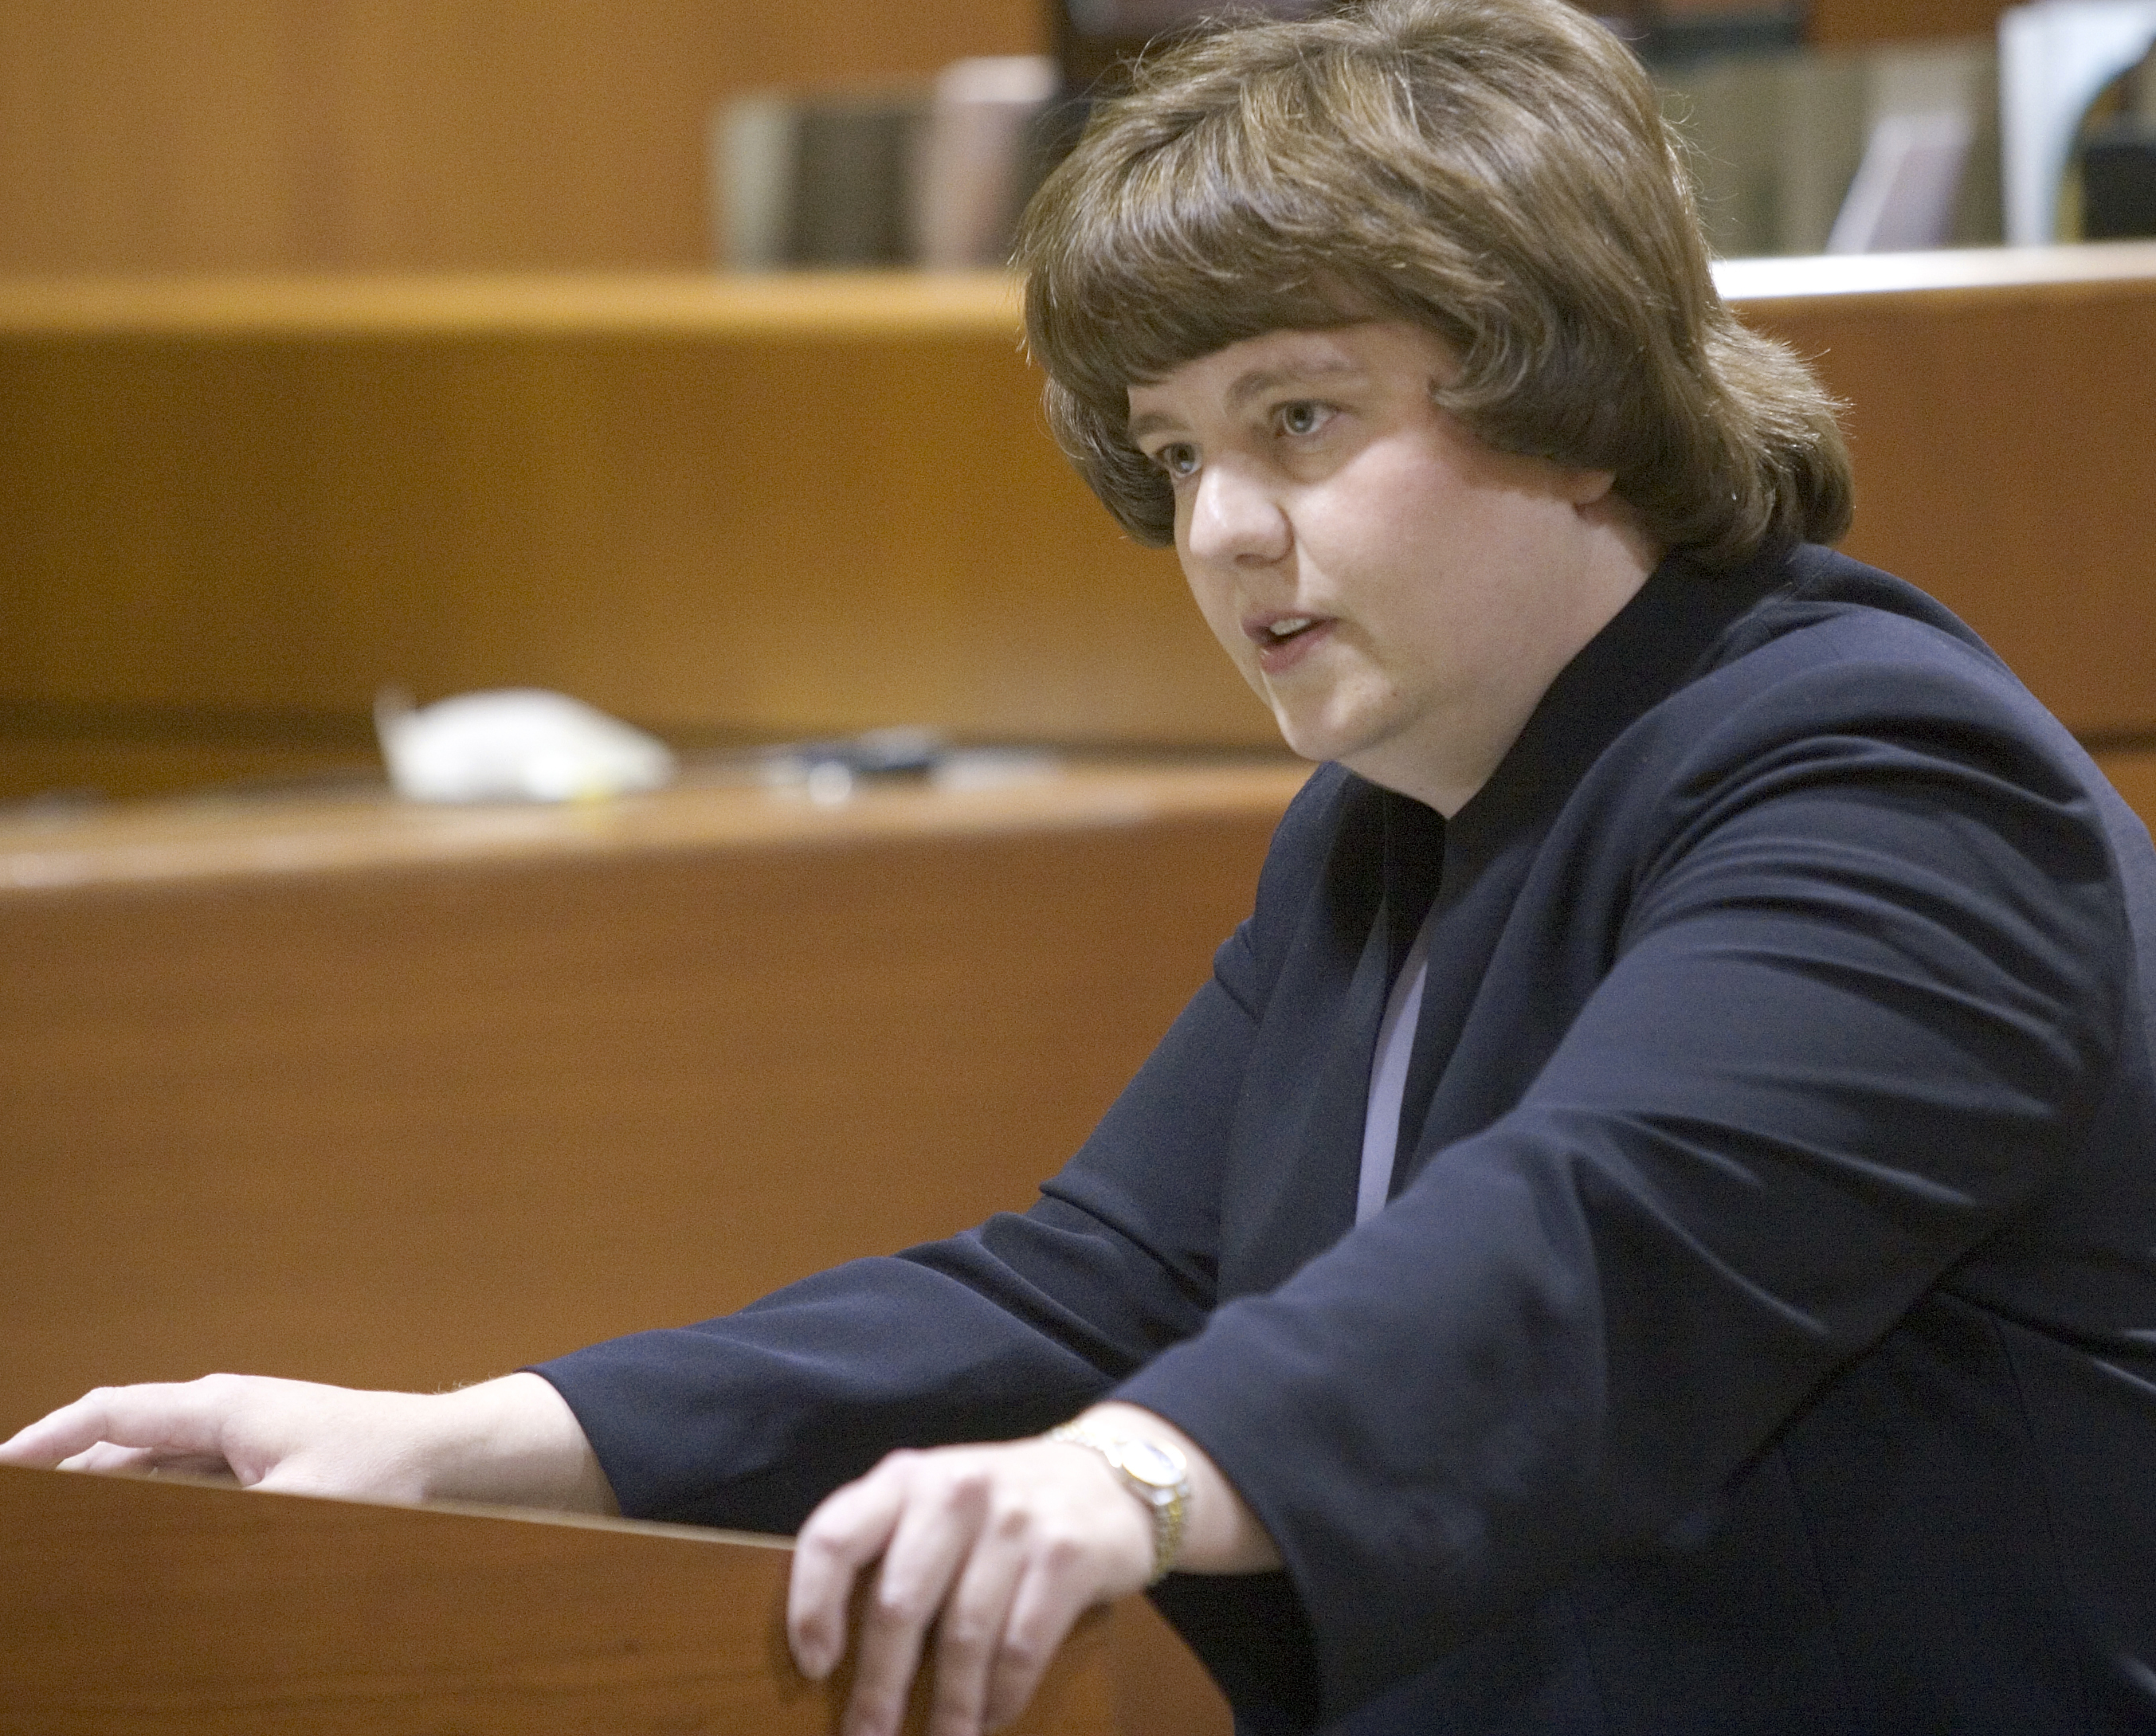 In this Oct. 27, 2004 photo, Rachel Mitchell makes an opening statement in the trial of Karl LeClaire at court in Mesa, Ariz. Senate Republicans are bringing Mitchell to handle questioning about allegations of sexual assault against Supreme Court nominee Brett Kavanaugh on Thursday, Sept. 27, 2018. (Jack Kurtz&mdash;AP)